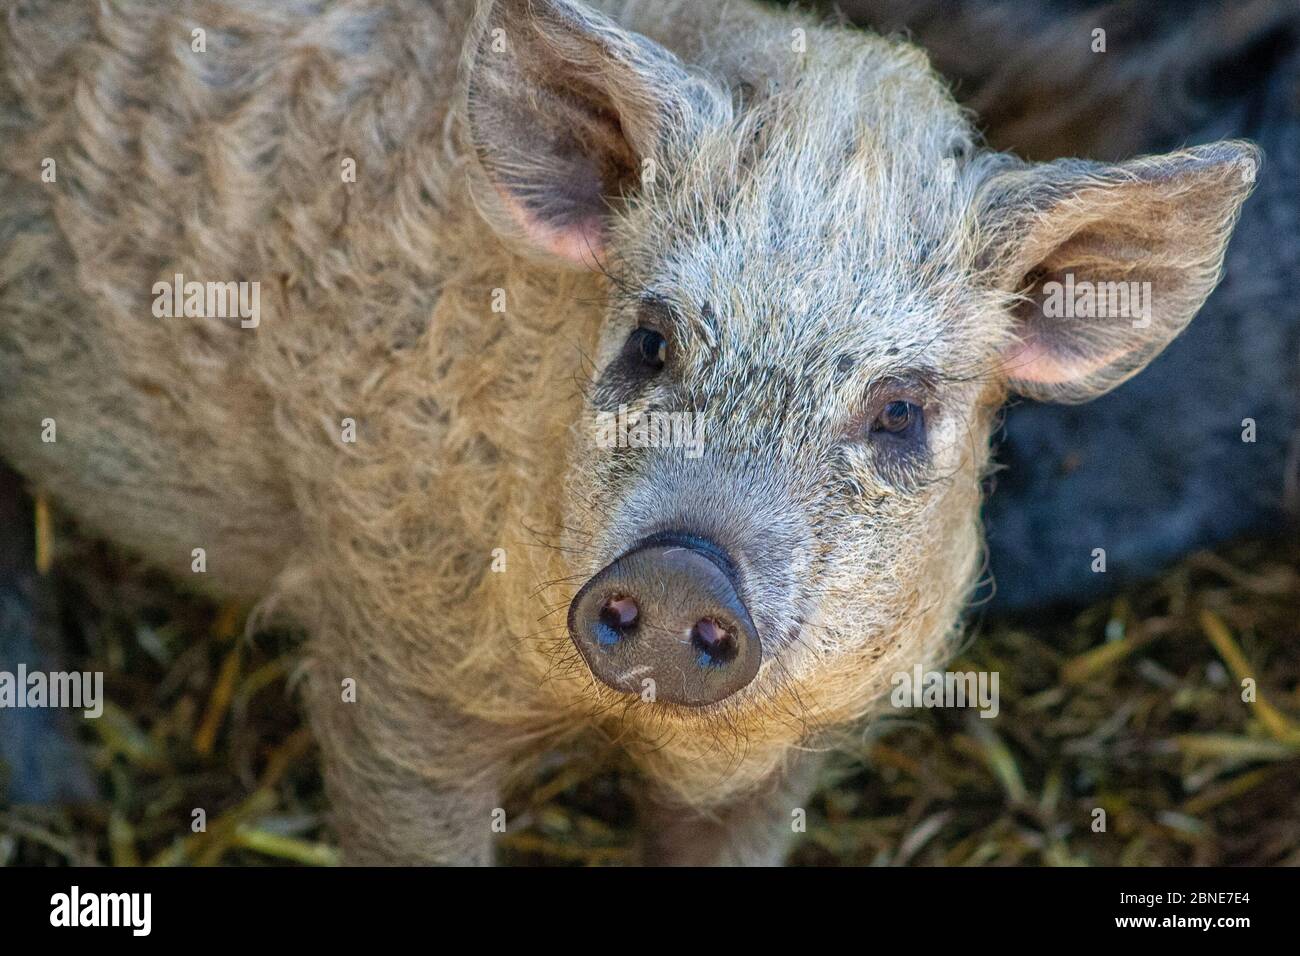 The head of a young woolen pig Stock Photo